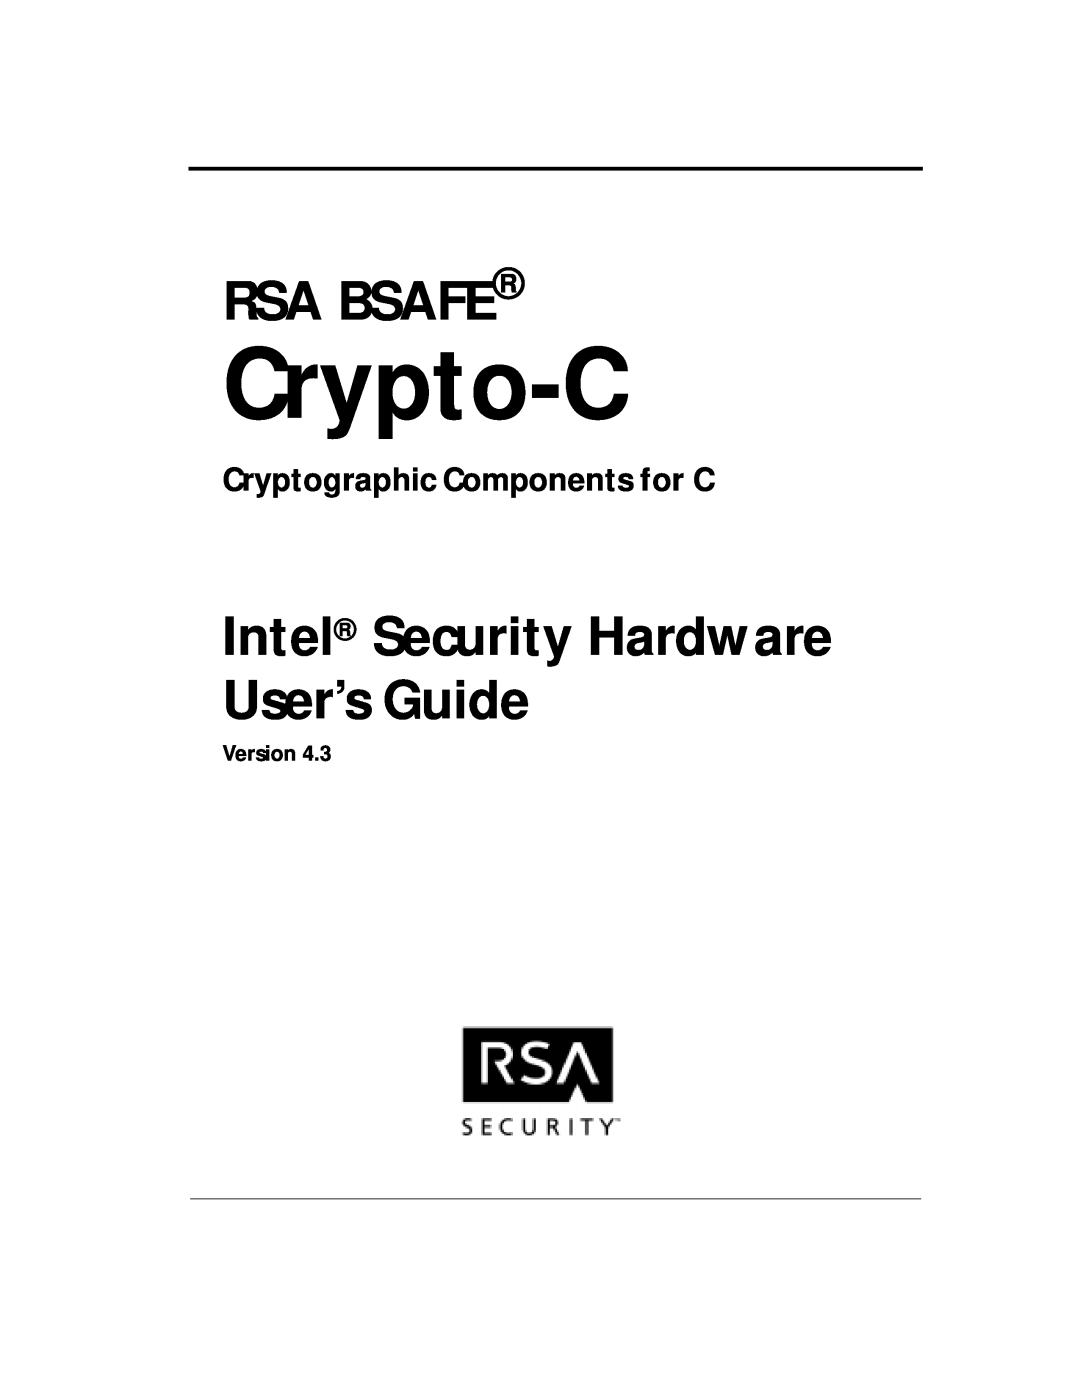 RSA Security 4.3 manual Cryptographic Components for C, Crypto-C, Rsa Bsafe, Intel Security Hardware User’s Guide, Version 